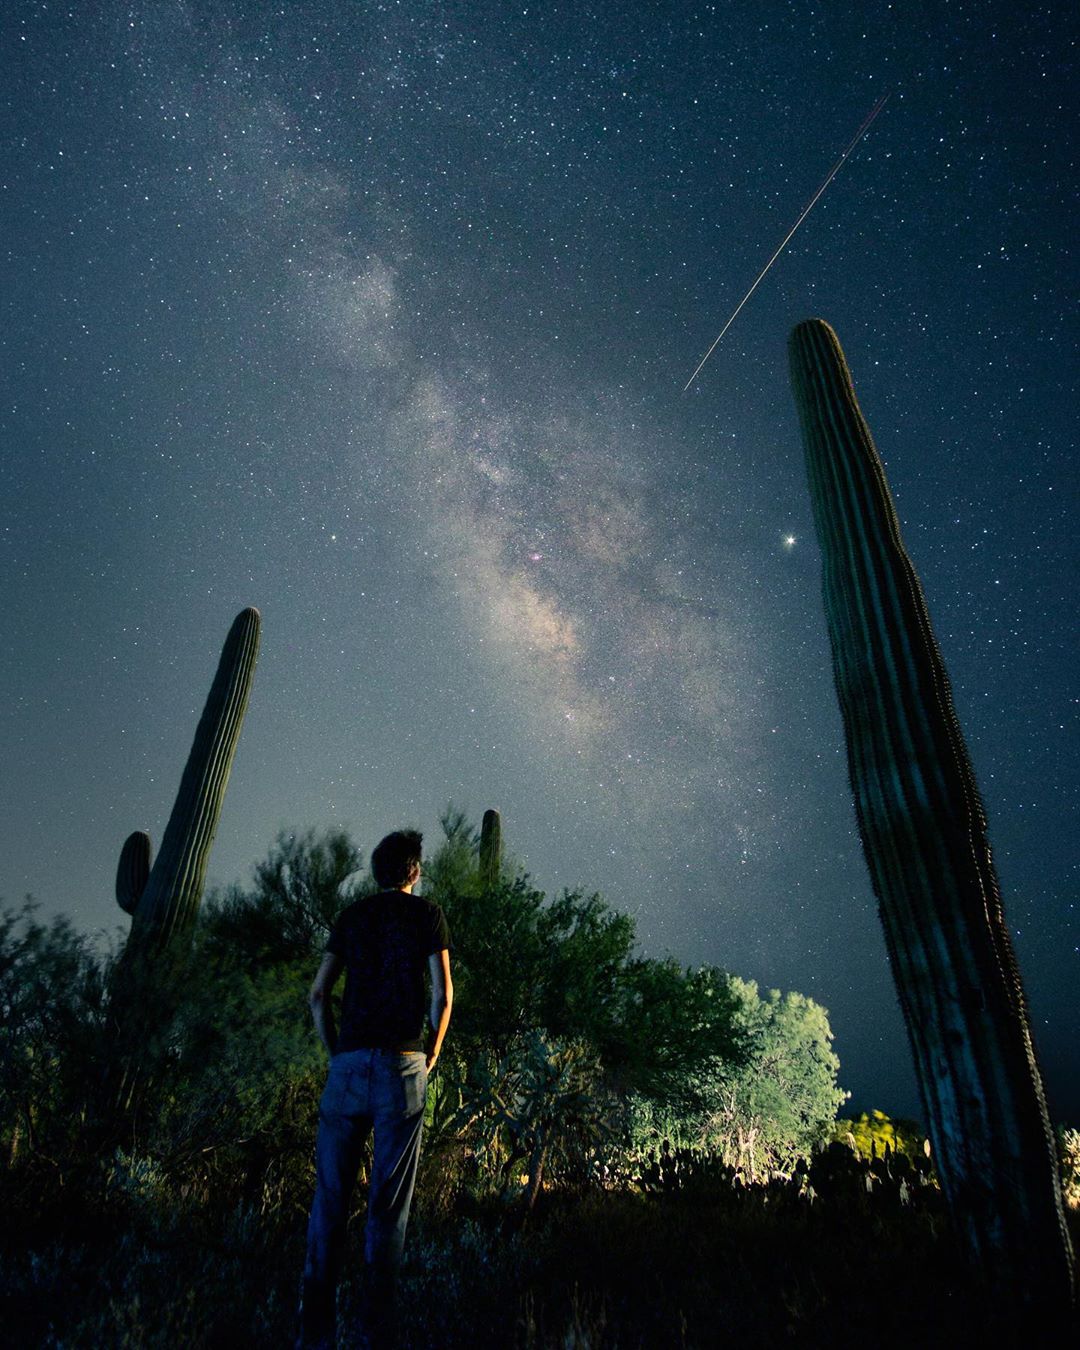 Guy staring up at the night sky looking at stars. Photo by Instagram user @catsphotoshoot